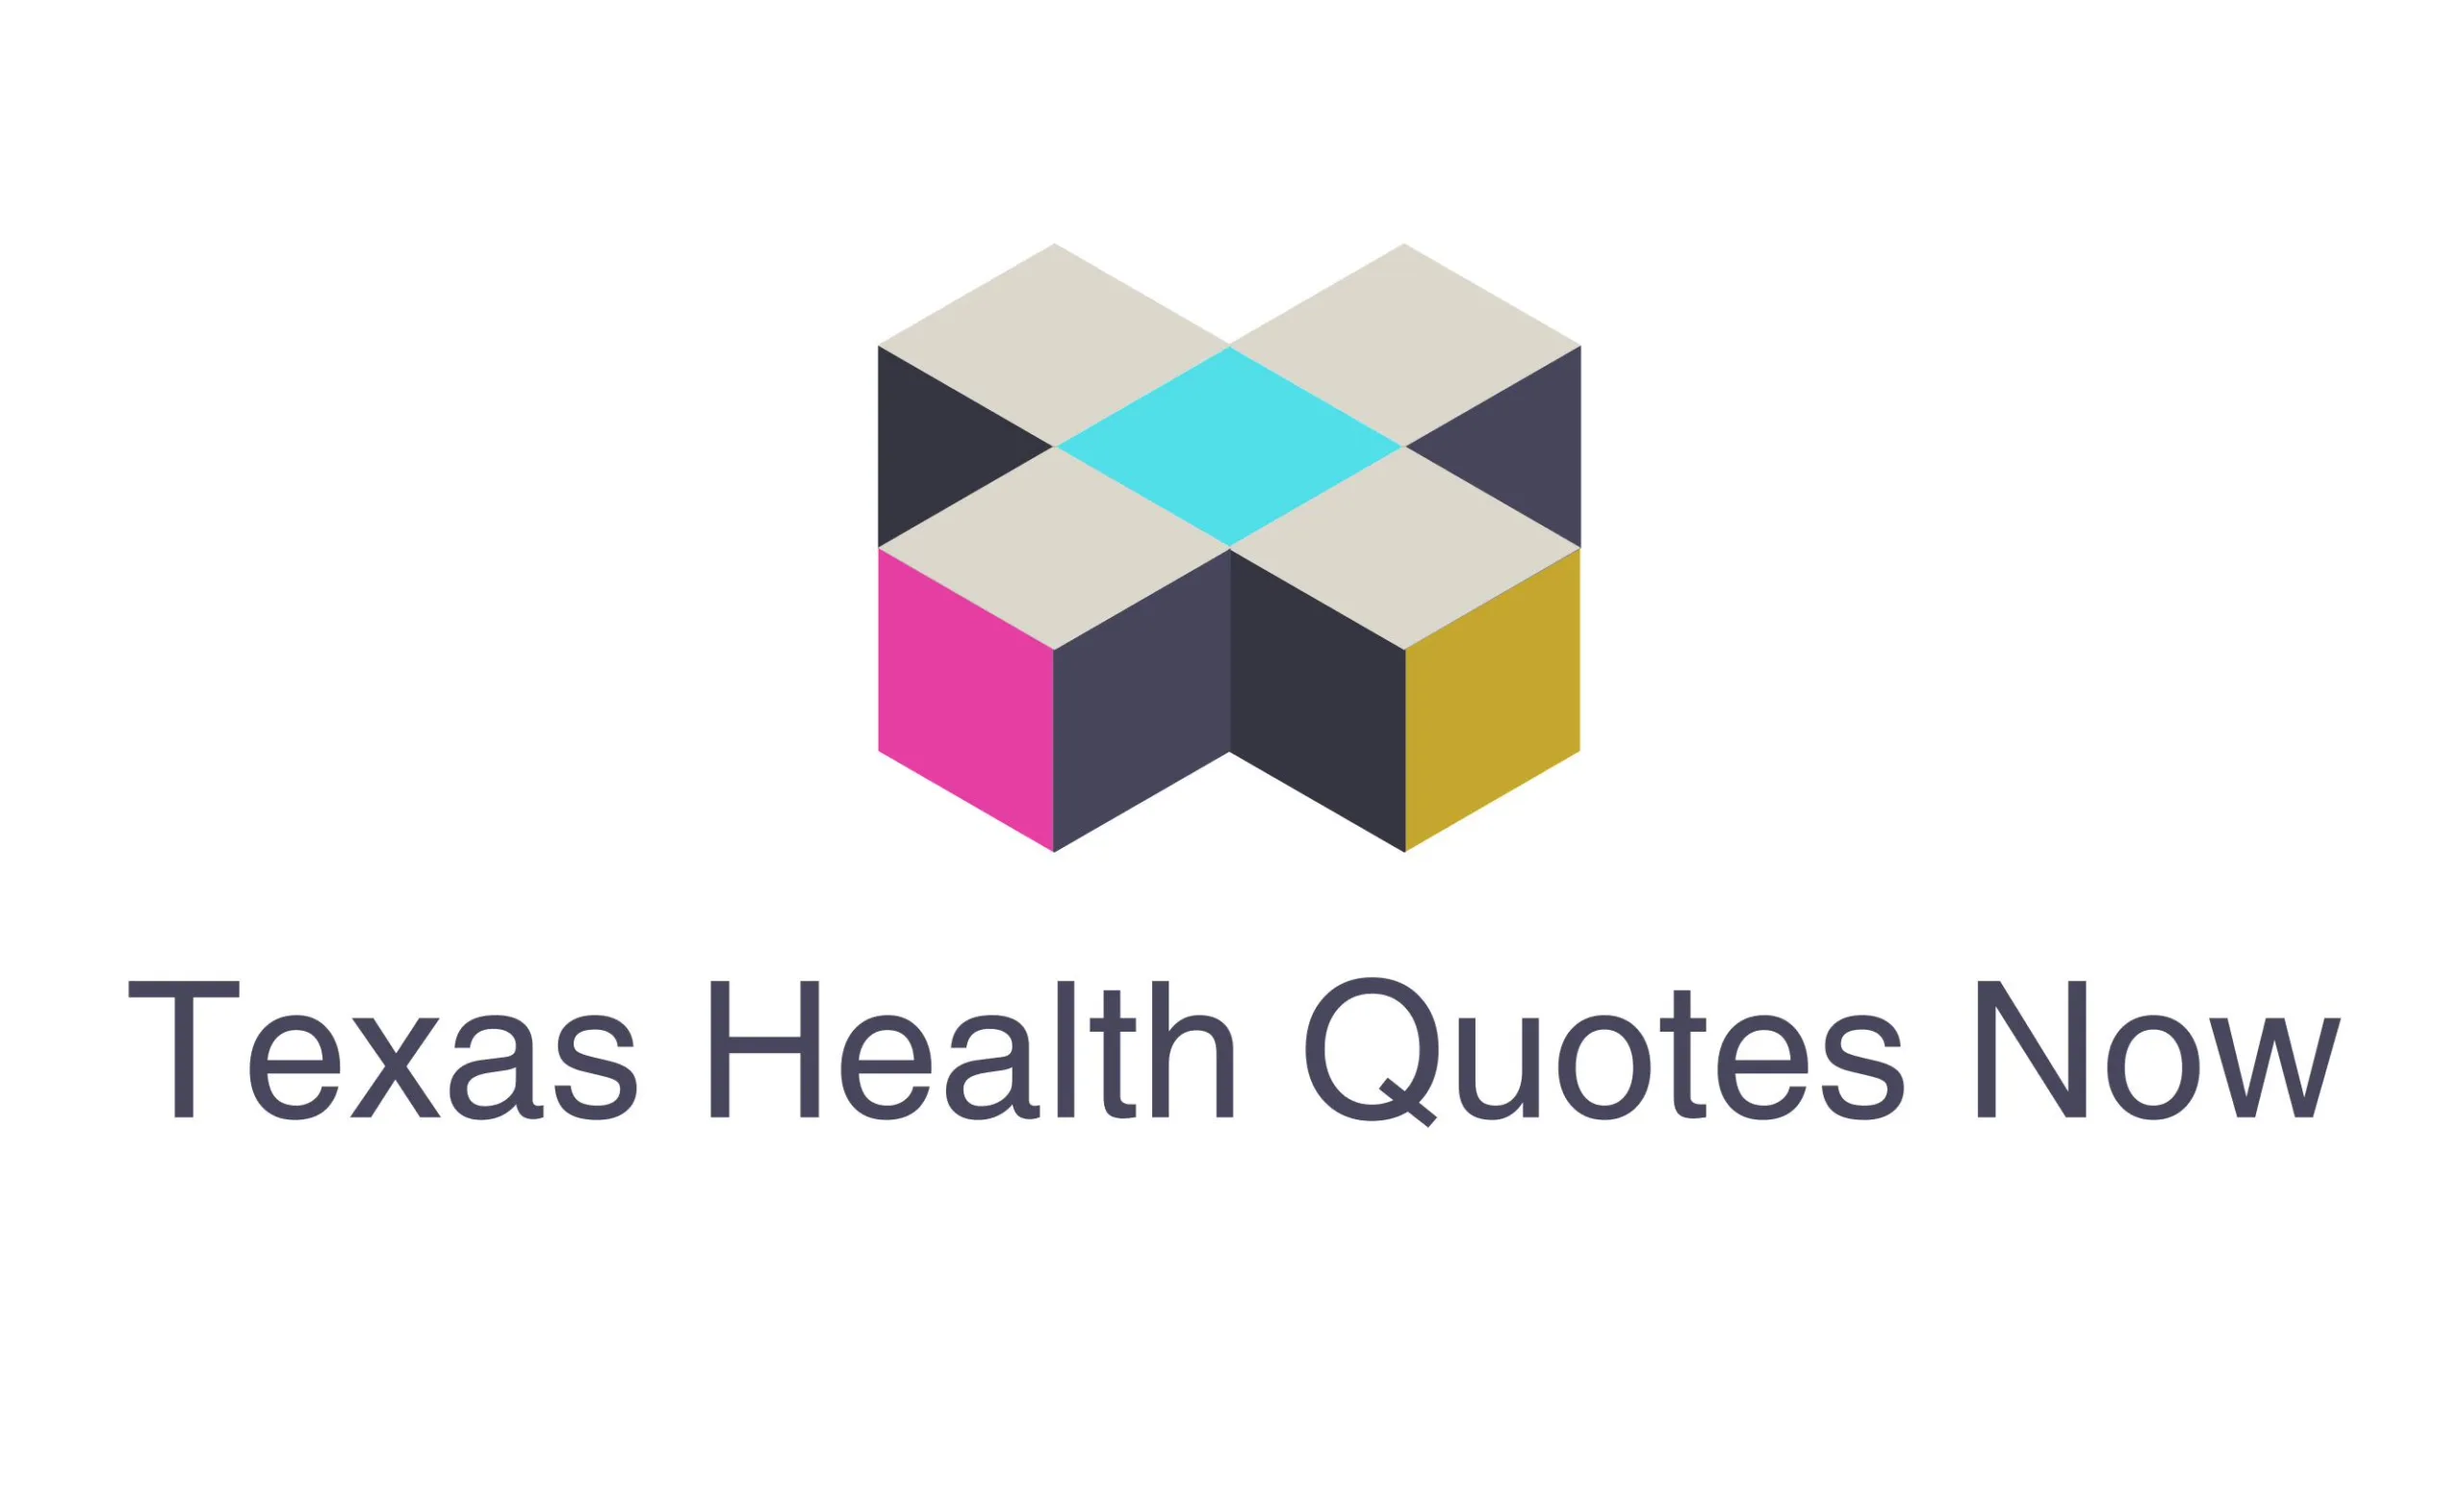 texas health quotes now is Karla Boles and does insurance for IREP she is sponsor